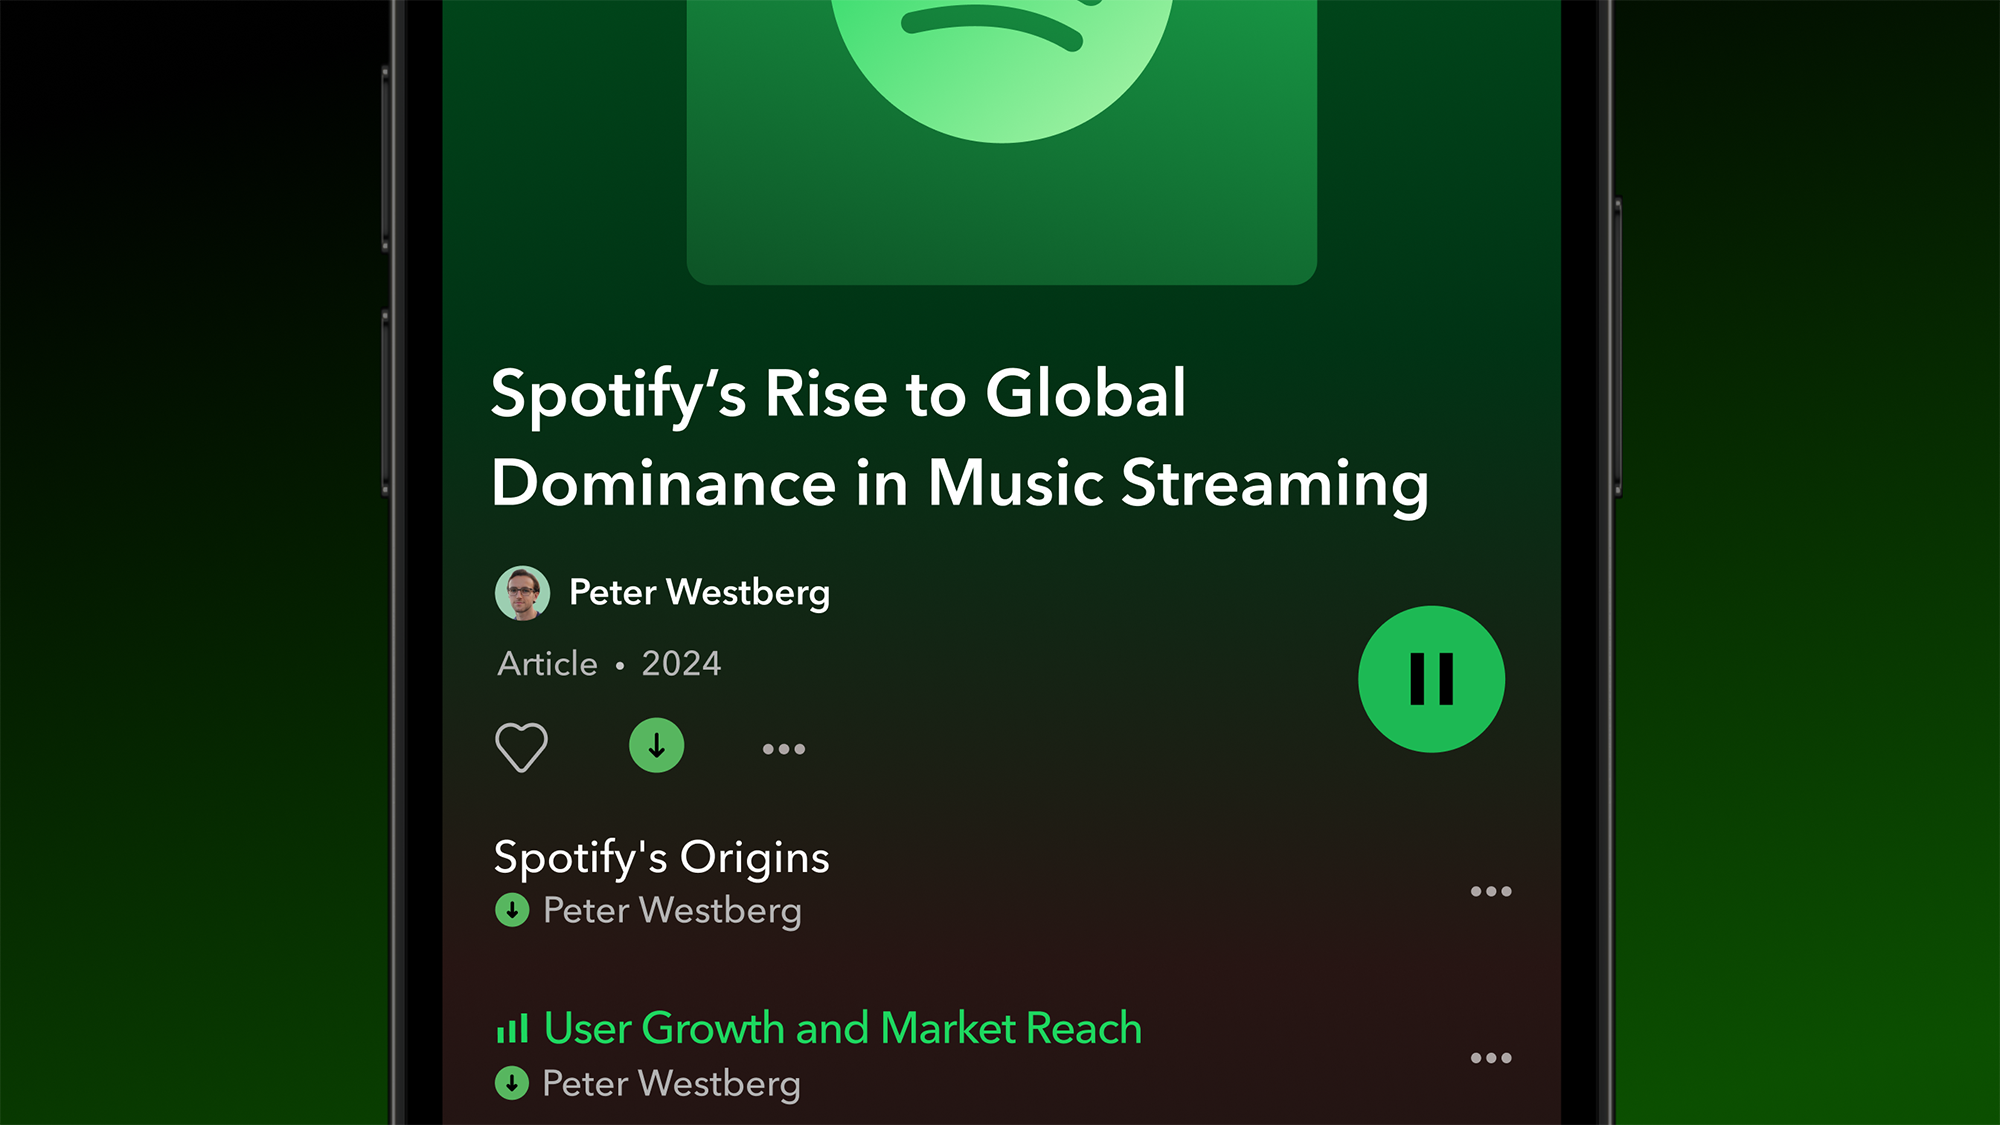 Spotify's Rise to Global Dominance in Music Streaming